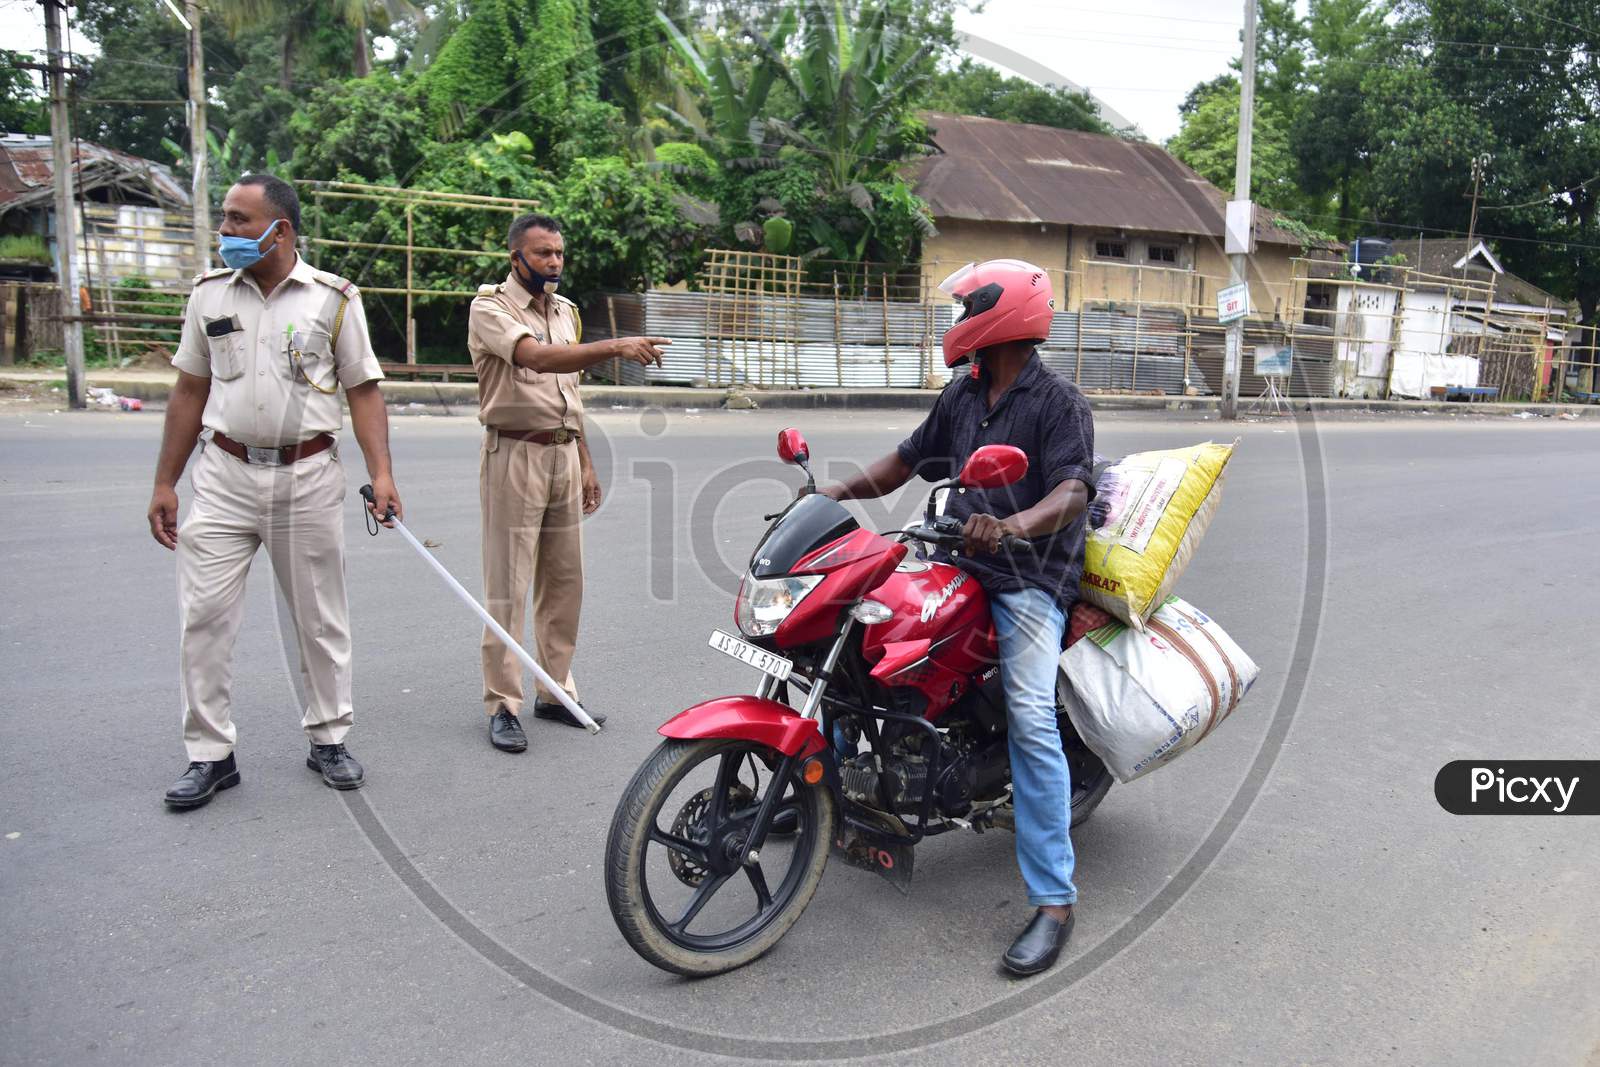 Police officers question a biker during the lockdown imposed by the Assam government to curb the spread of coronavirus in Nagaon, Assam on July 04, 2020